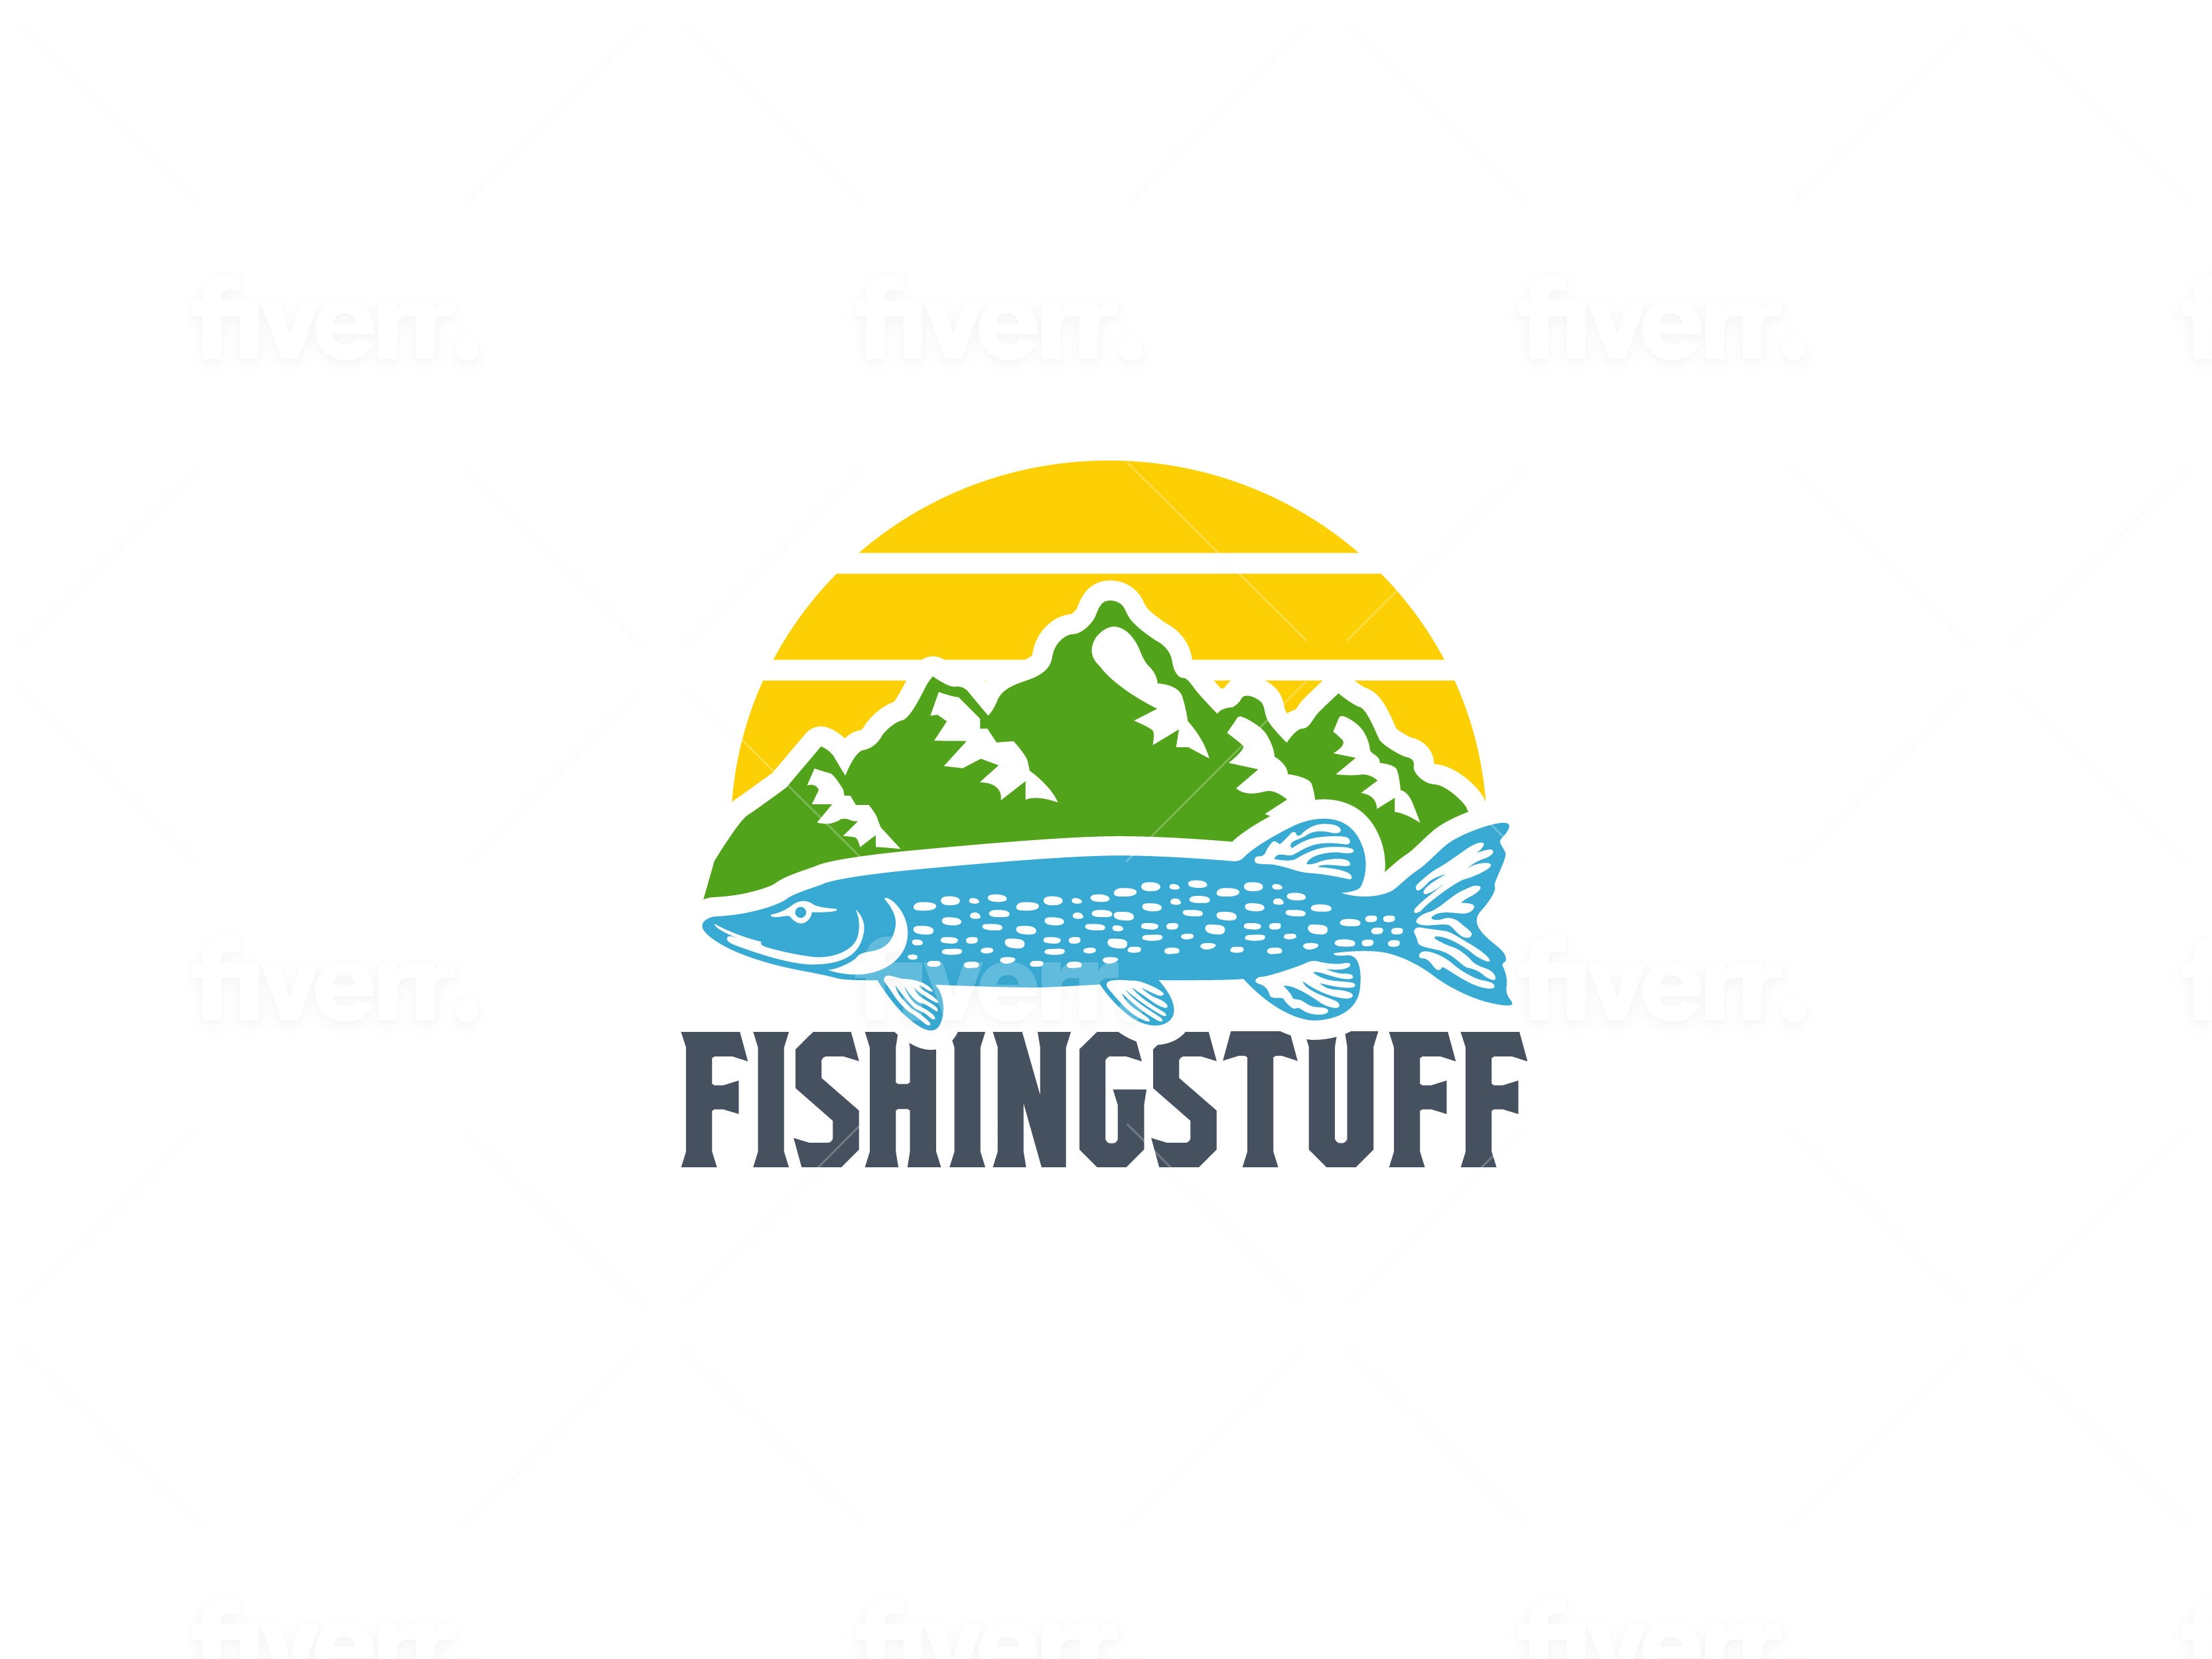 Fishingstuff - Online Shop for Fresh and Saltwater Fishing